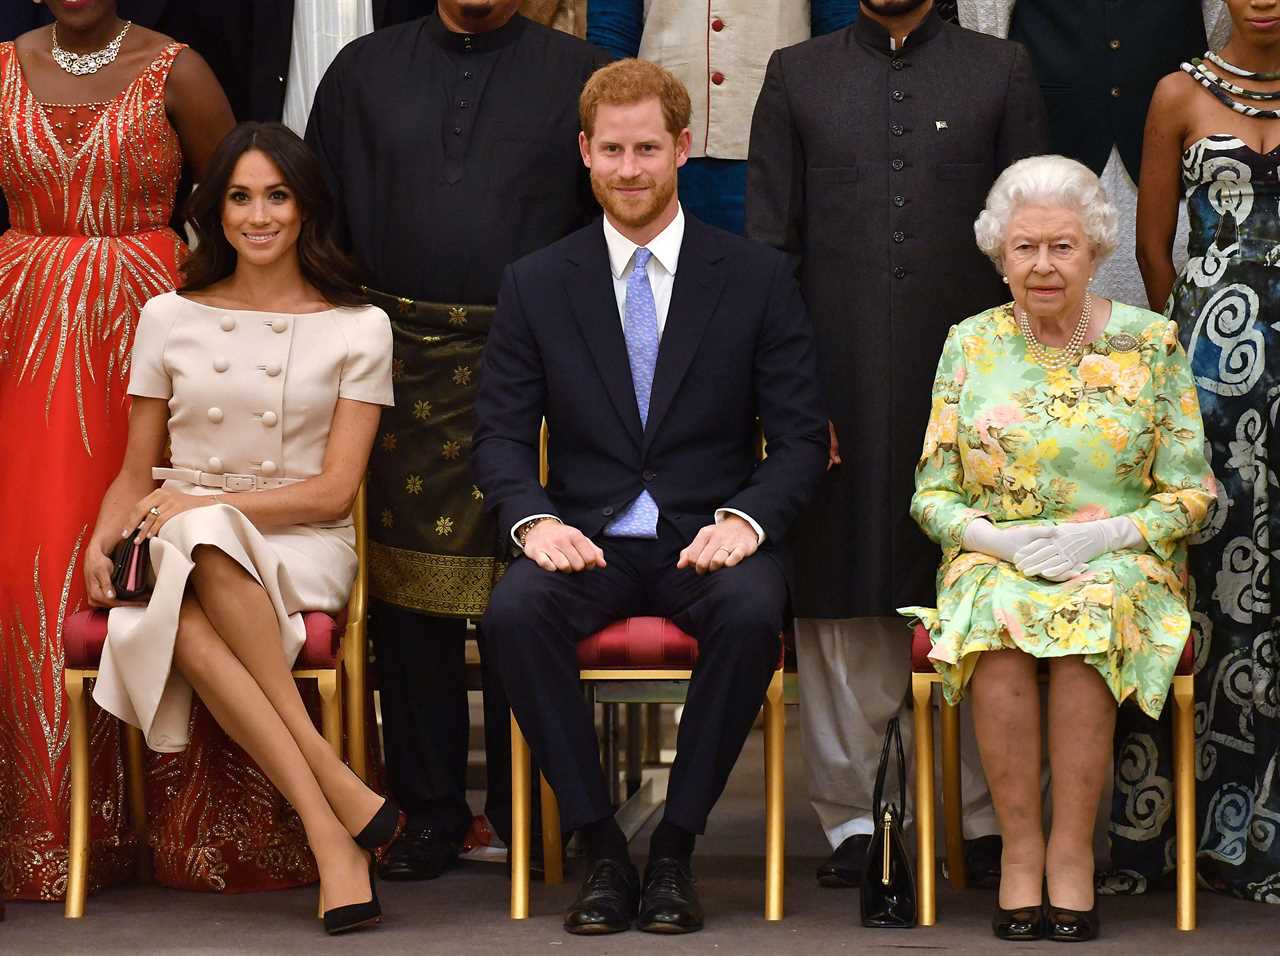 Queen’s telling reaction to Prince Harry’s romance with Meghan Markle revealed in explosive book